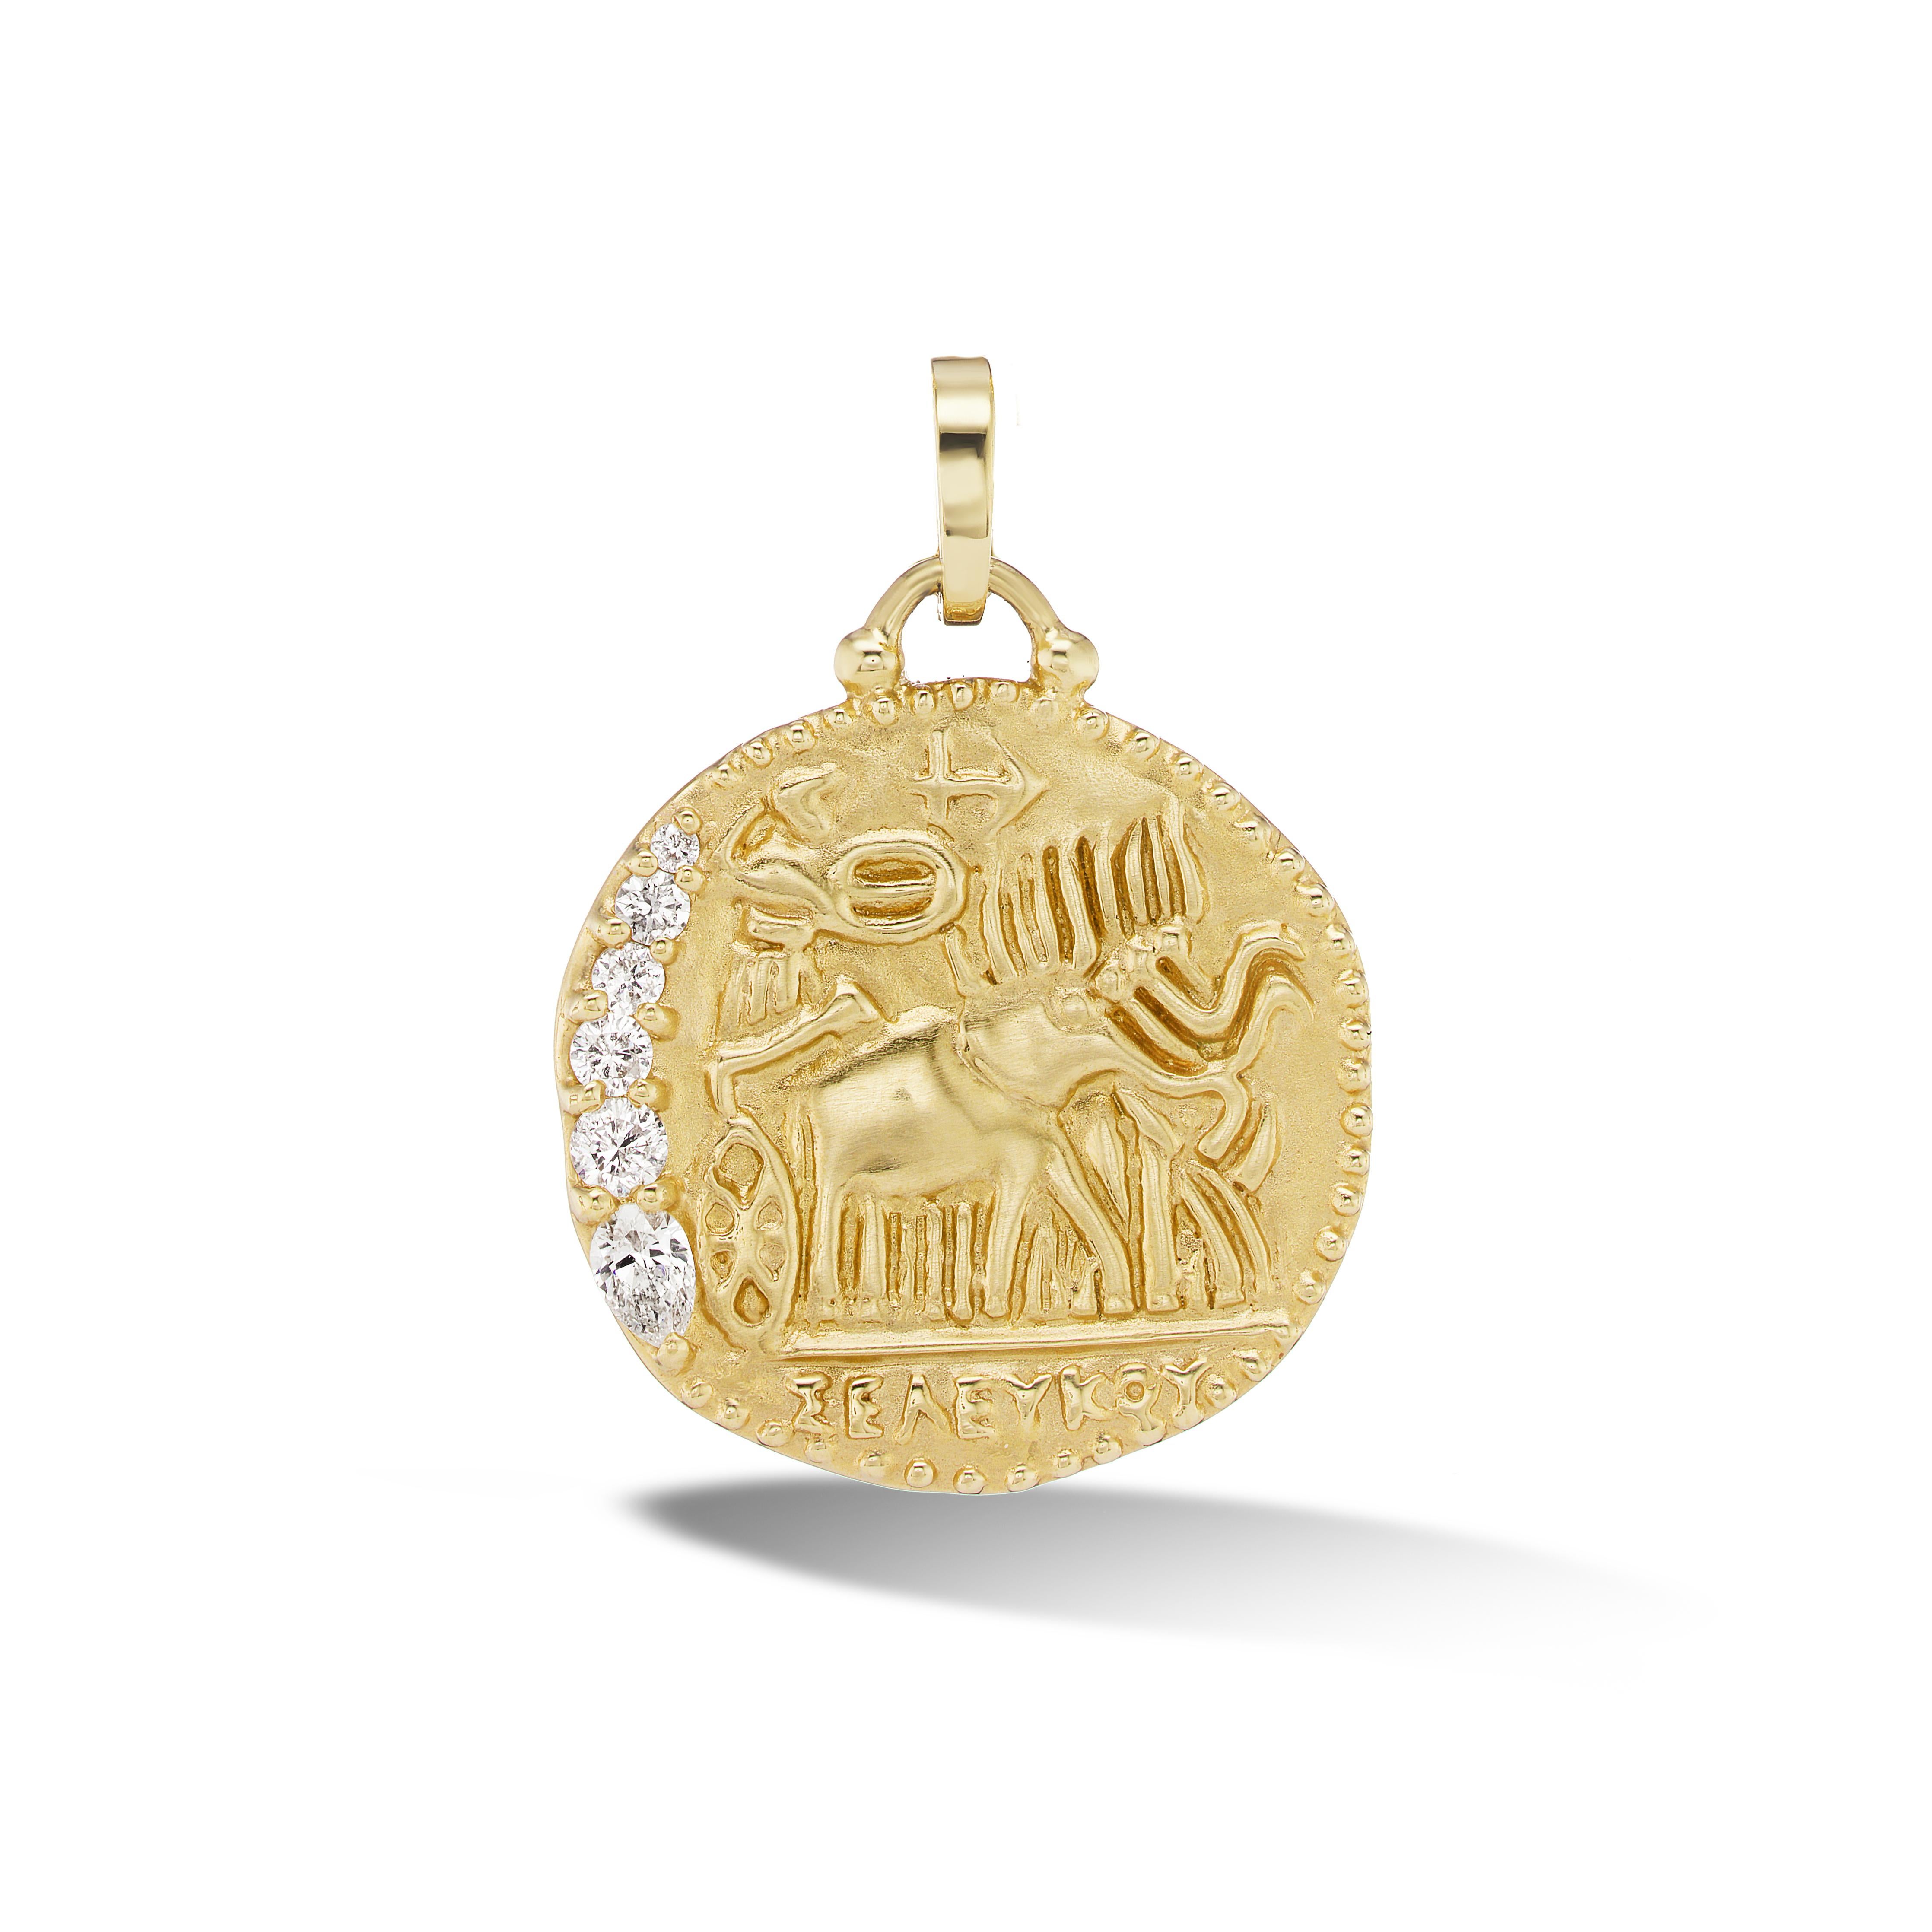 Inspired by a coin with its roots in the Seleucid Empire, this talisman charm depicts Athena, goddess of wisdom and war strategy, driving a chariot drawn by four war elephants, animals often used in warfare to impress and terrify enemies. Athena is